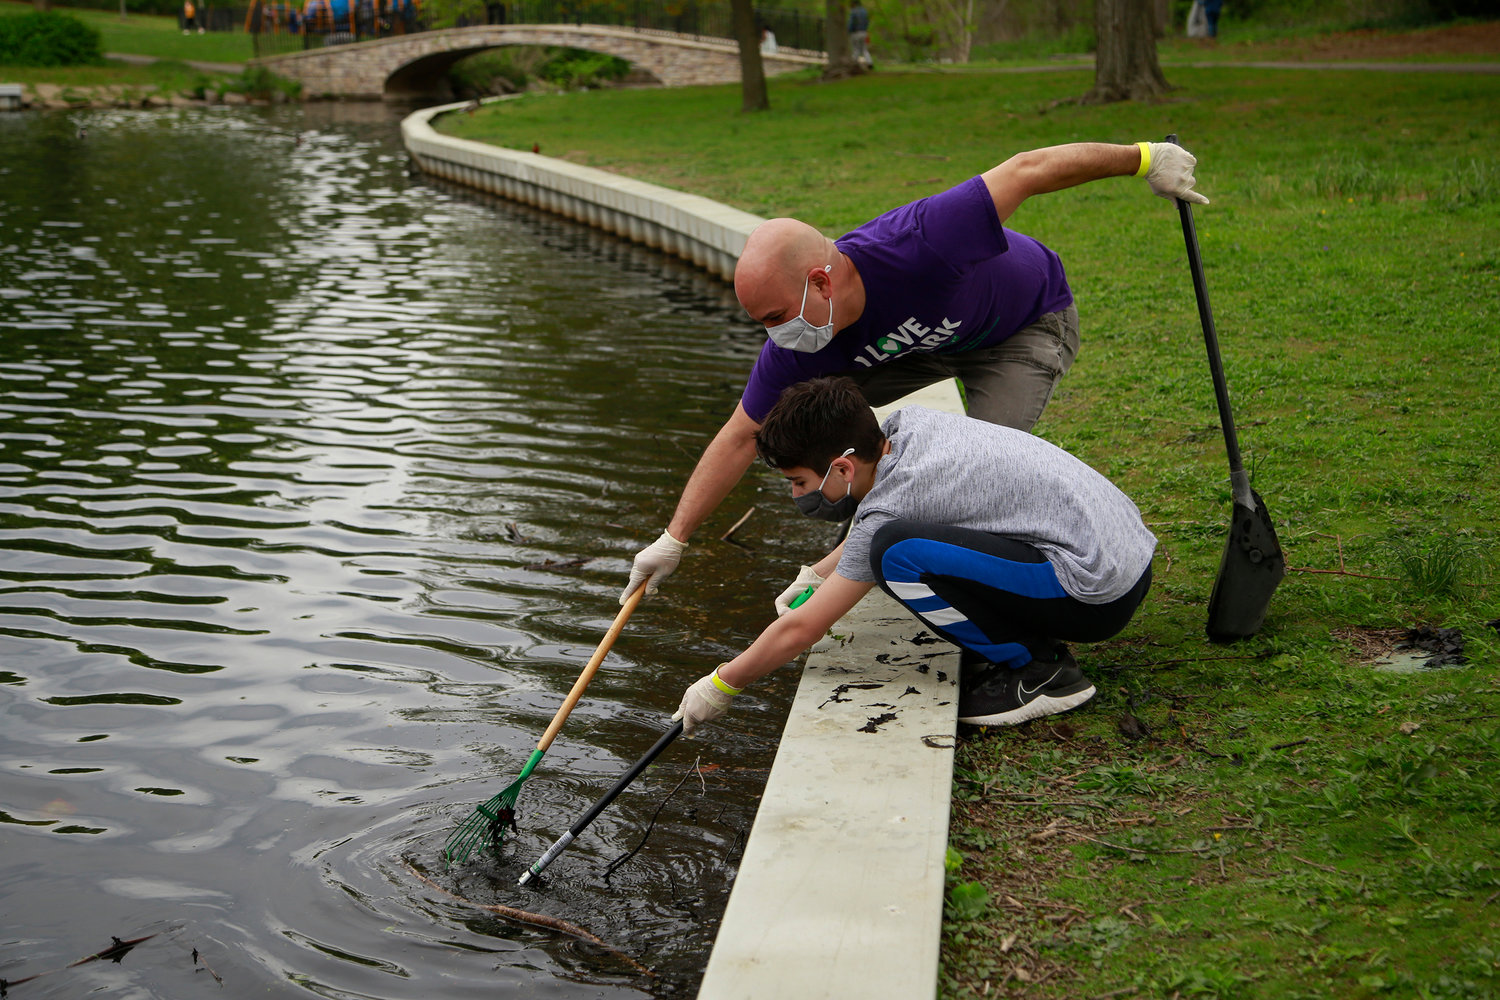 Volunteer Logan Shinsato, 12, and his father, Ivan, teamed up to loosen a pile of debris in the pond.